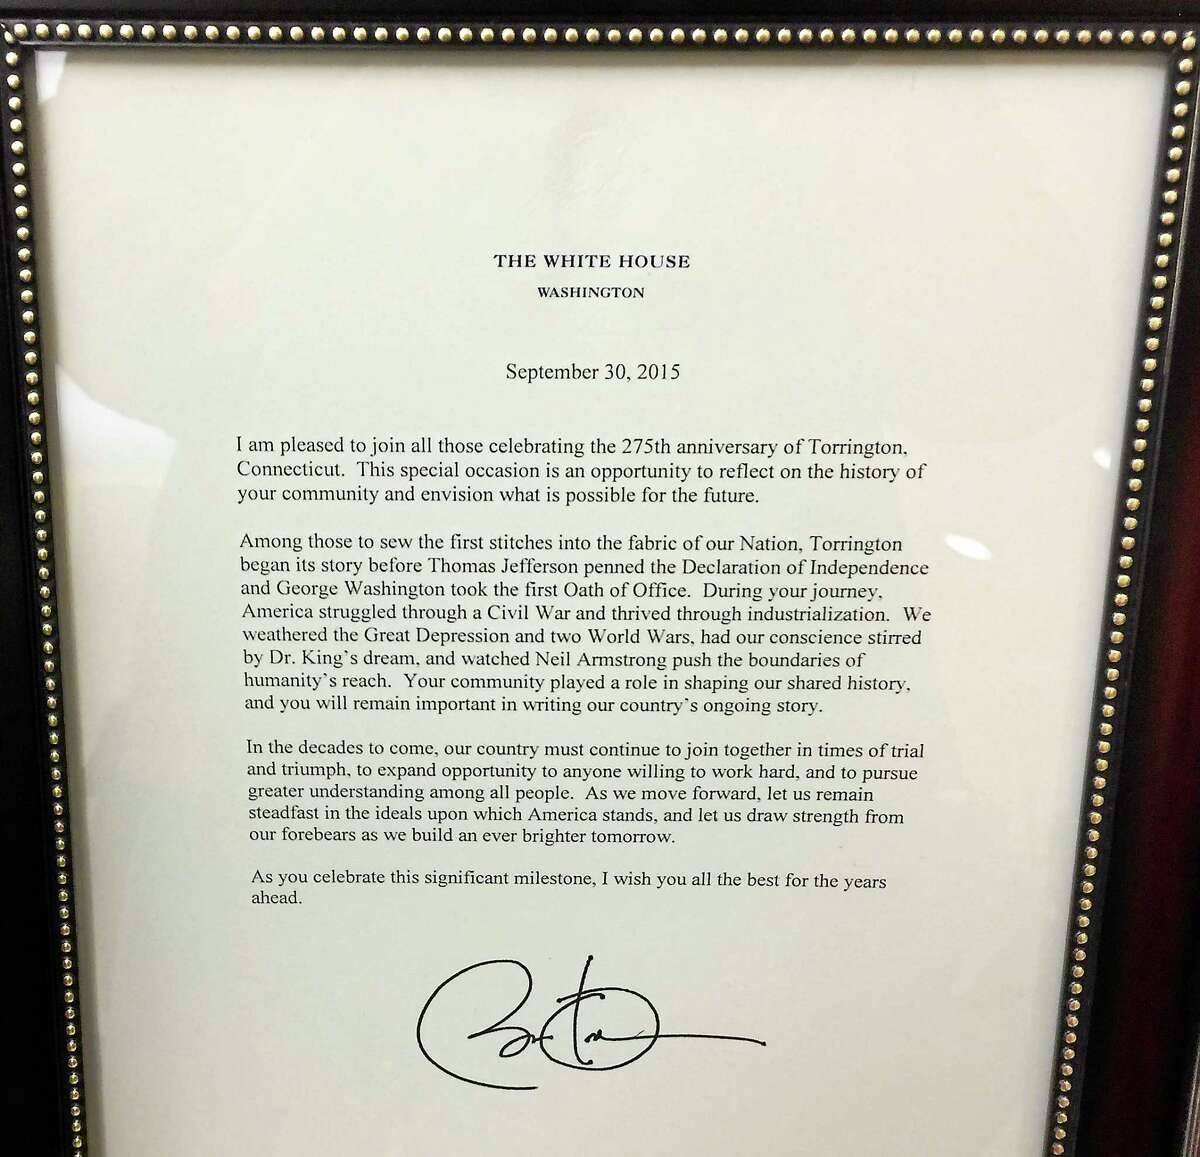 The proclamation sent by the White House in recognition of the recent celebration of Torrington’s 275th anniversary.